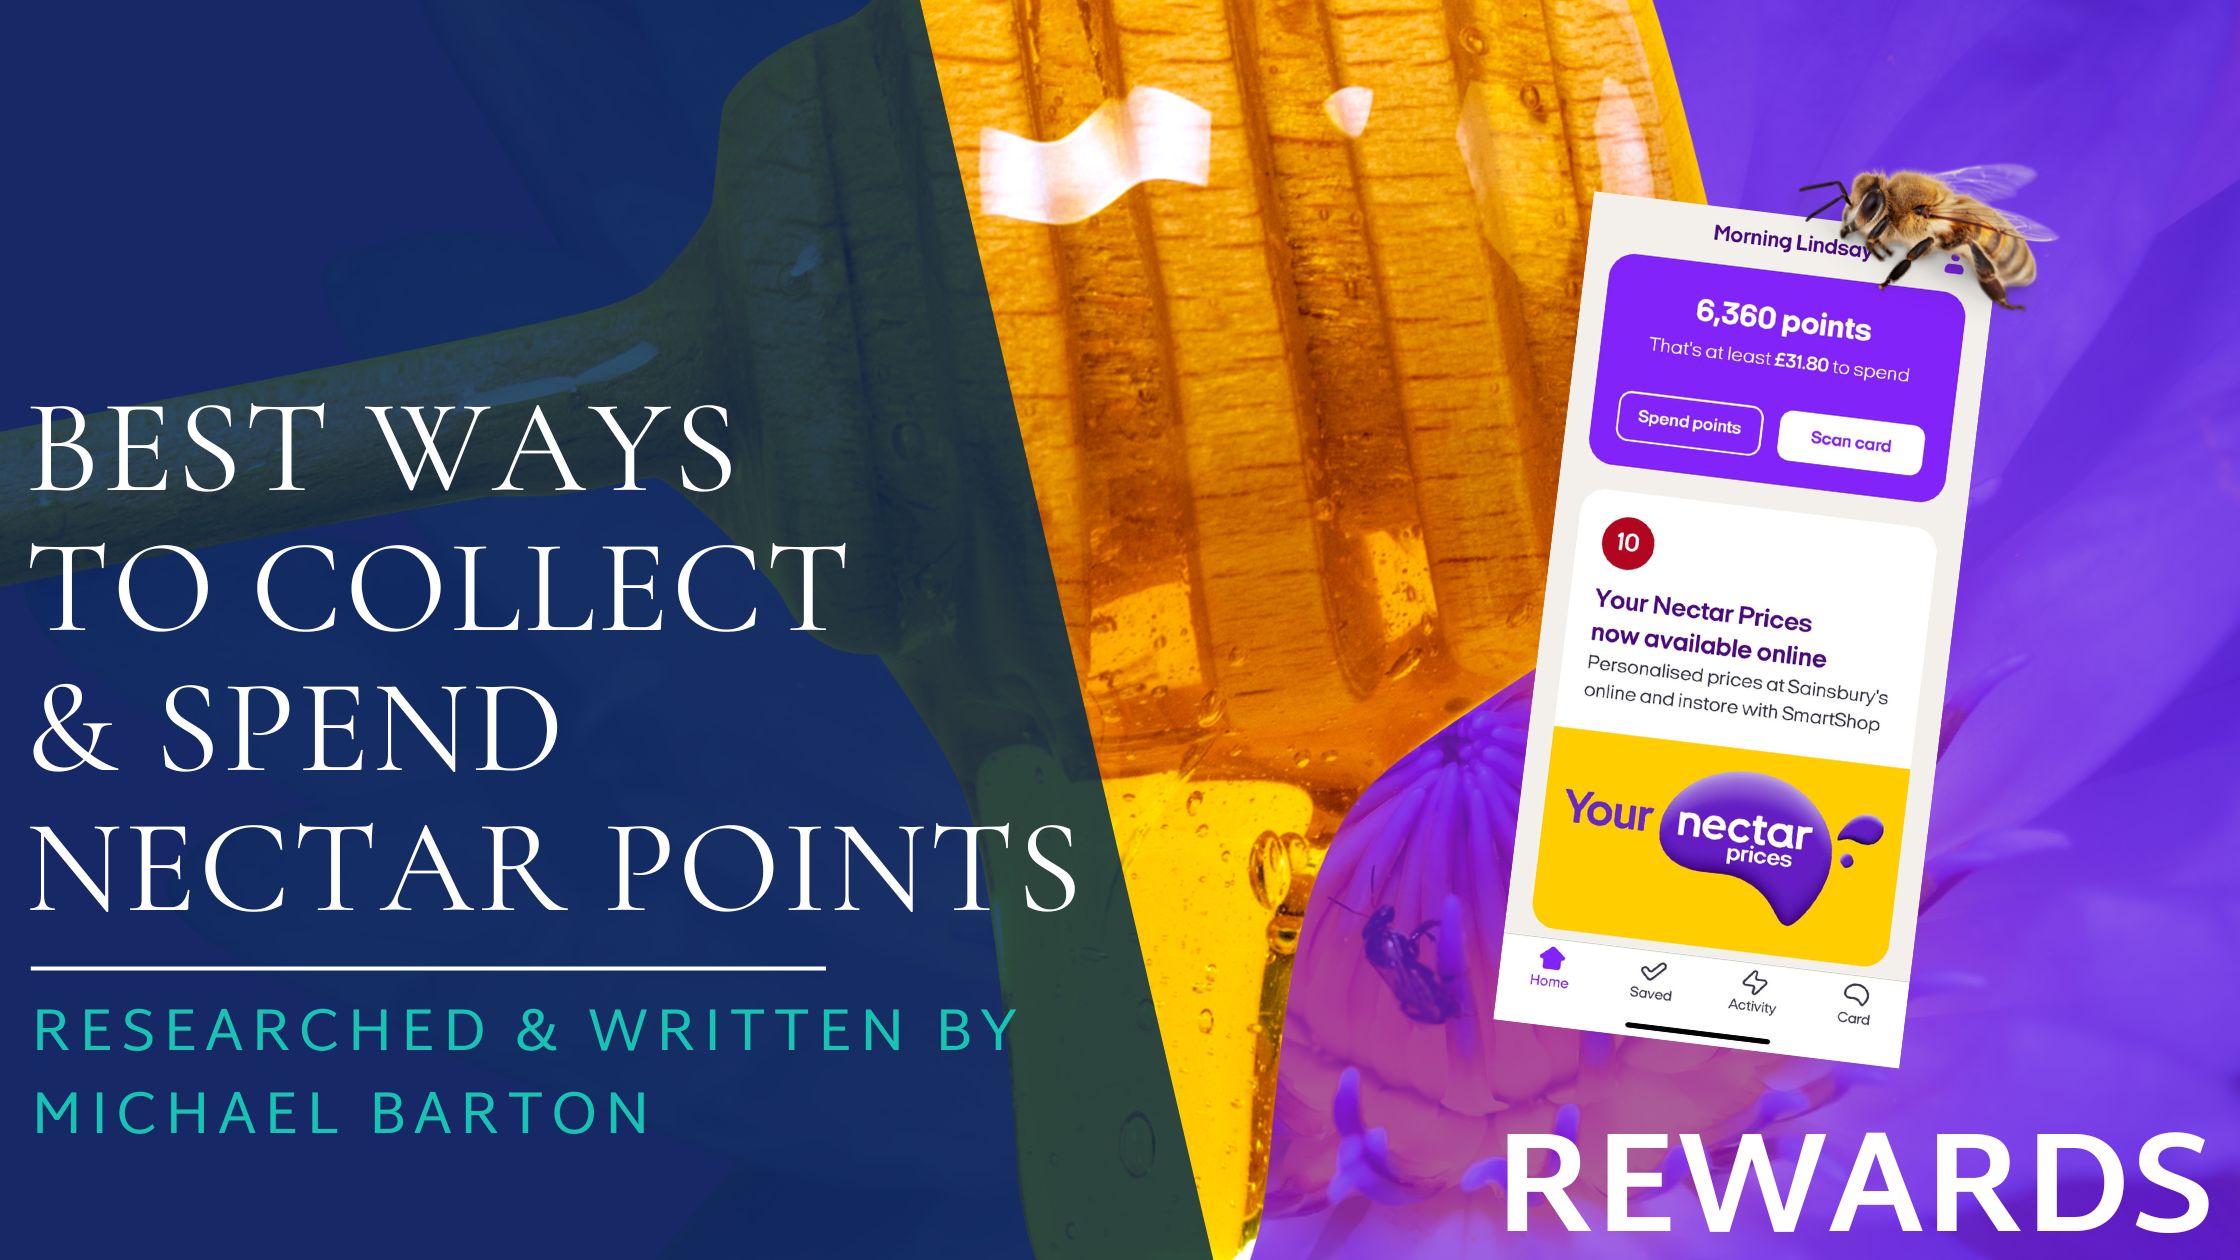 Best Ways To Collect & Spend Nectar Points feature image